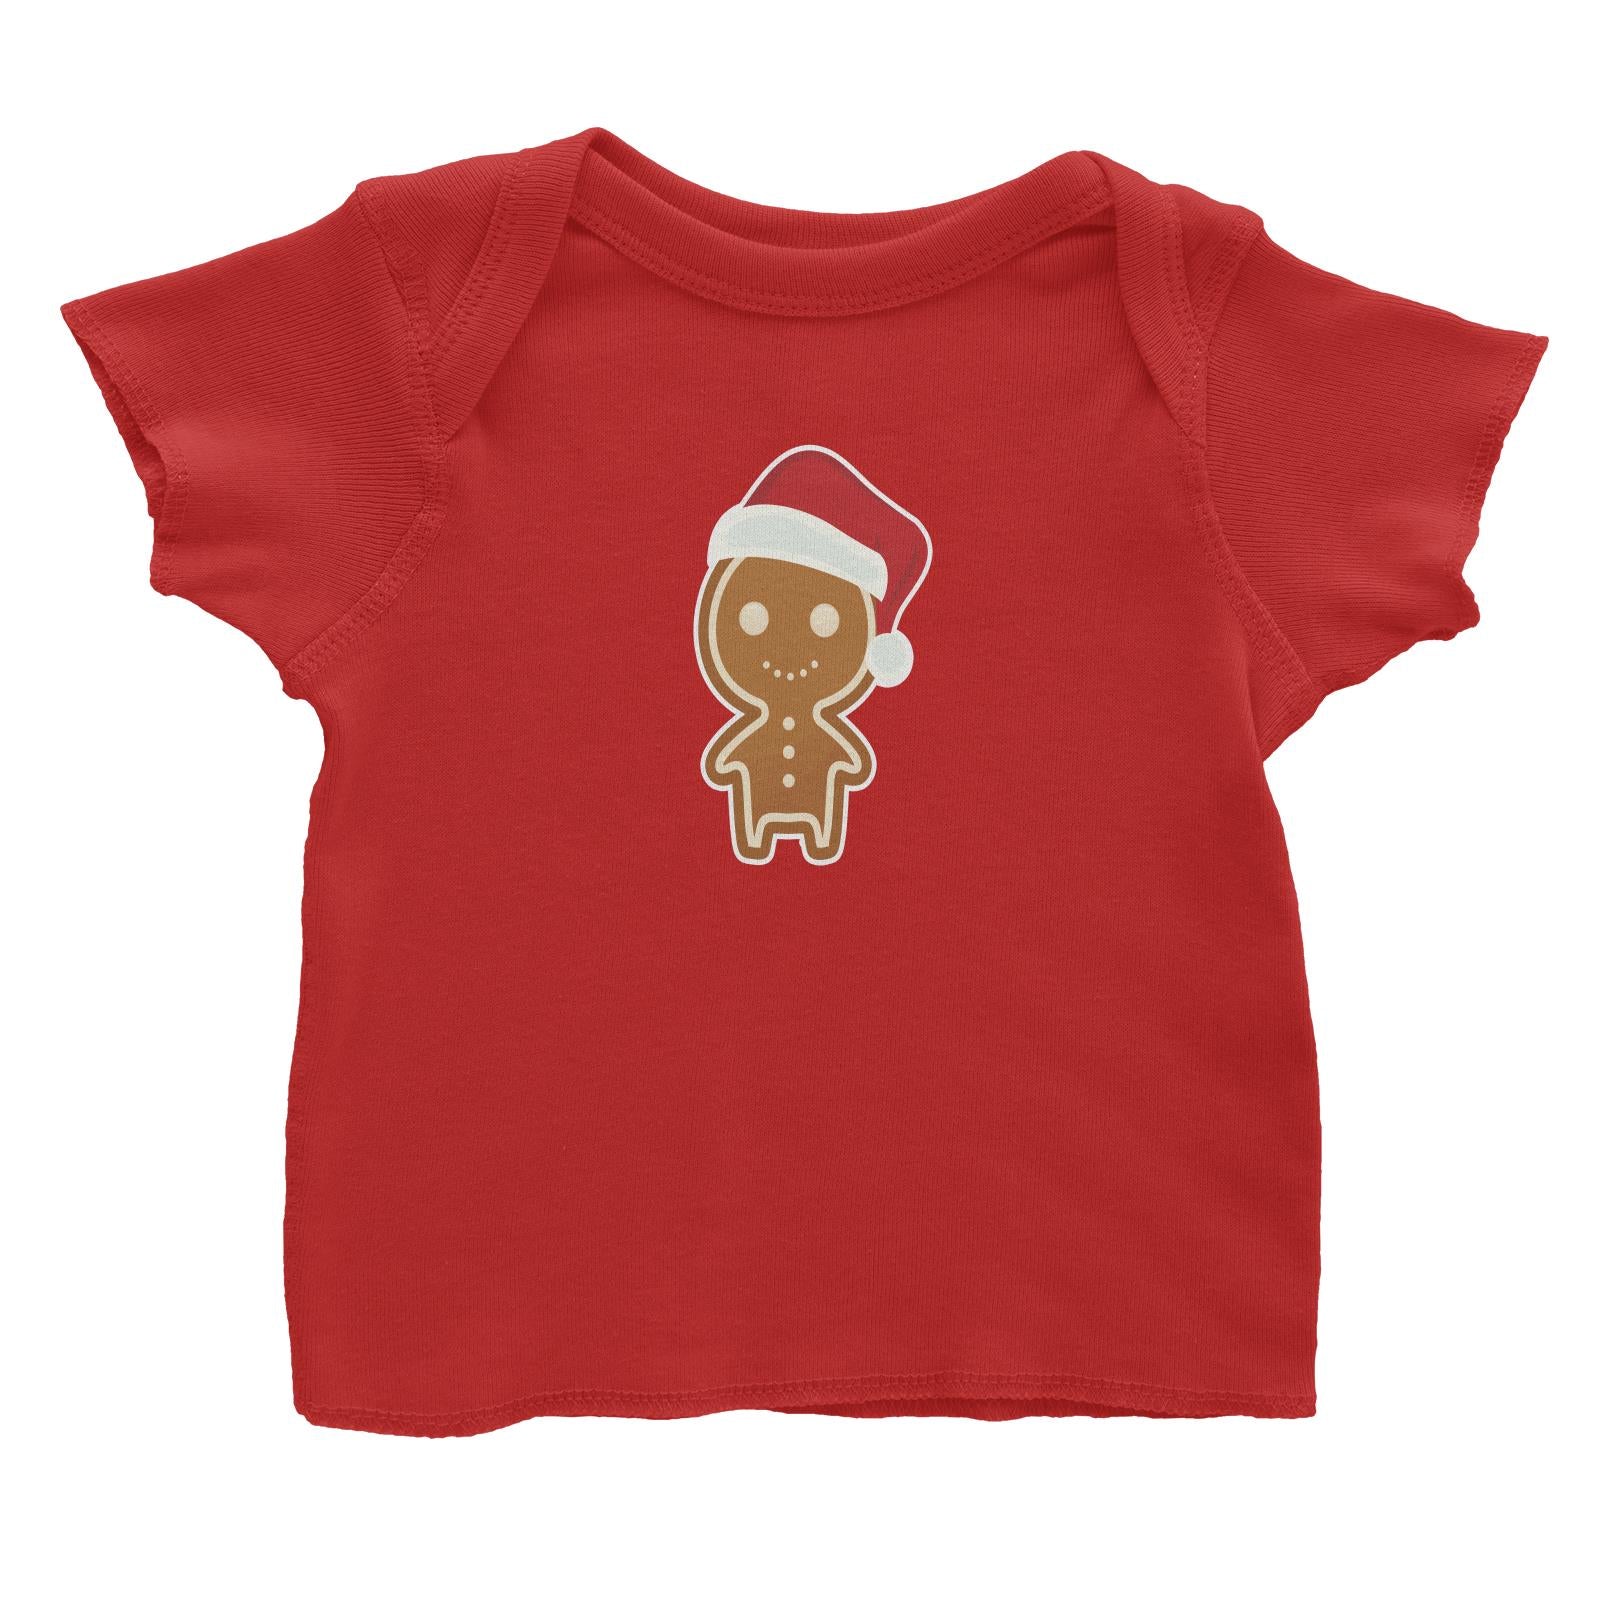 Cute Gingerbread Man with Santa Hat Baby T-Shirt Christmas Matching Family Funny